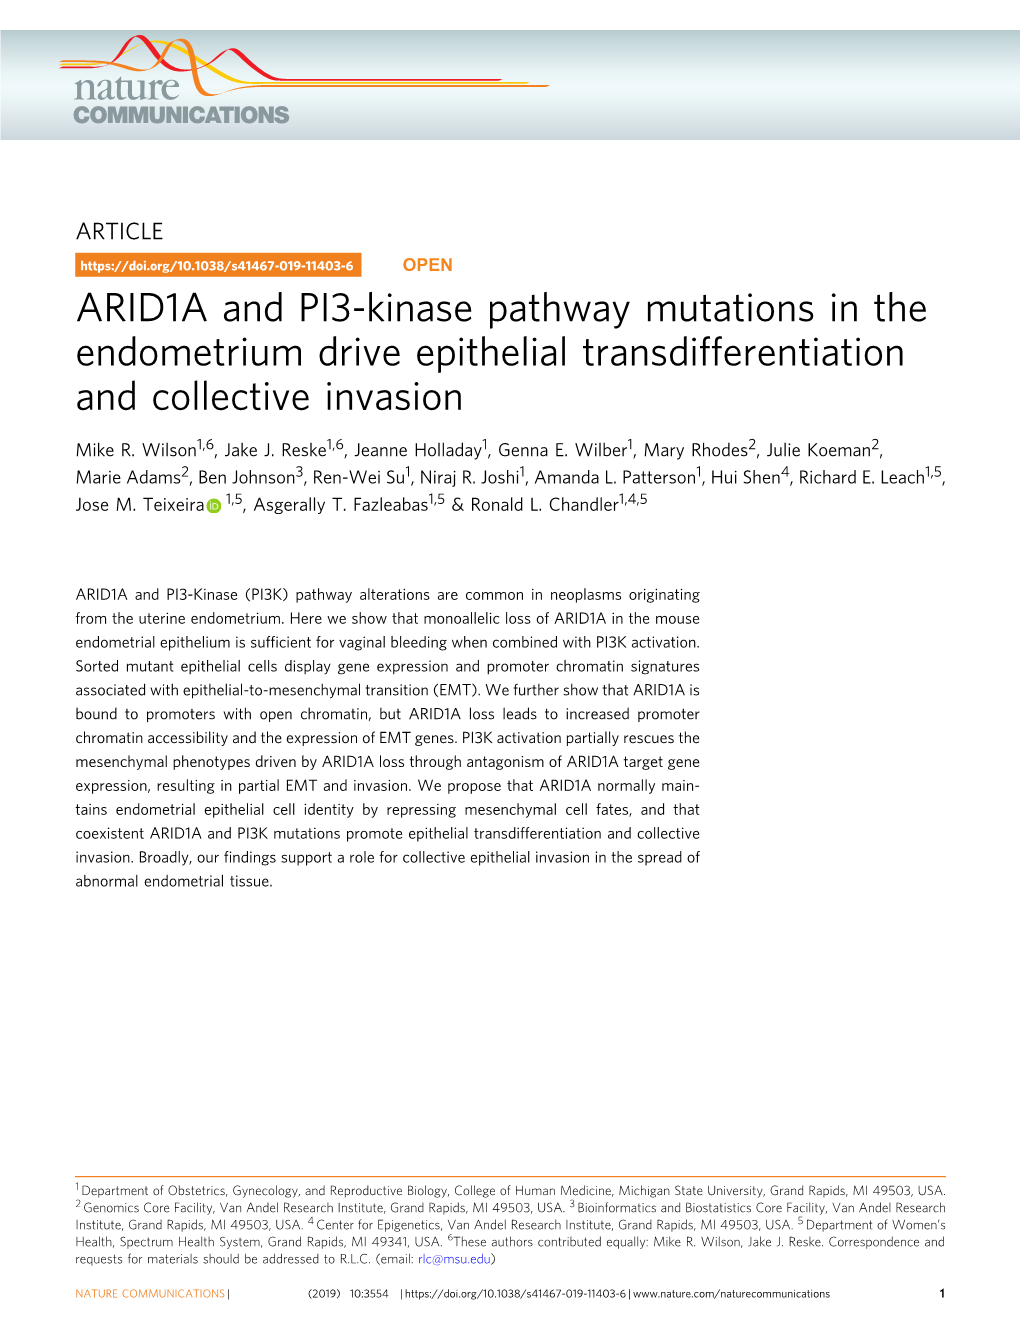 ARID1A and PI3-Kinase Pathway Mutations in the Endometrium Drive Epithelial Transdifferentiation and Collective Invasion